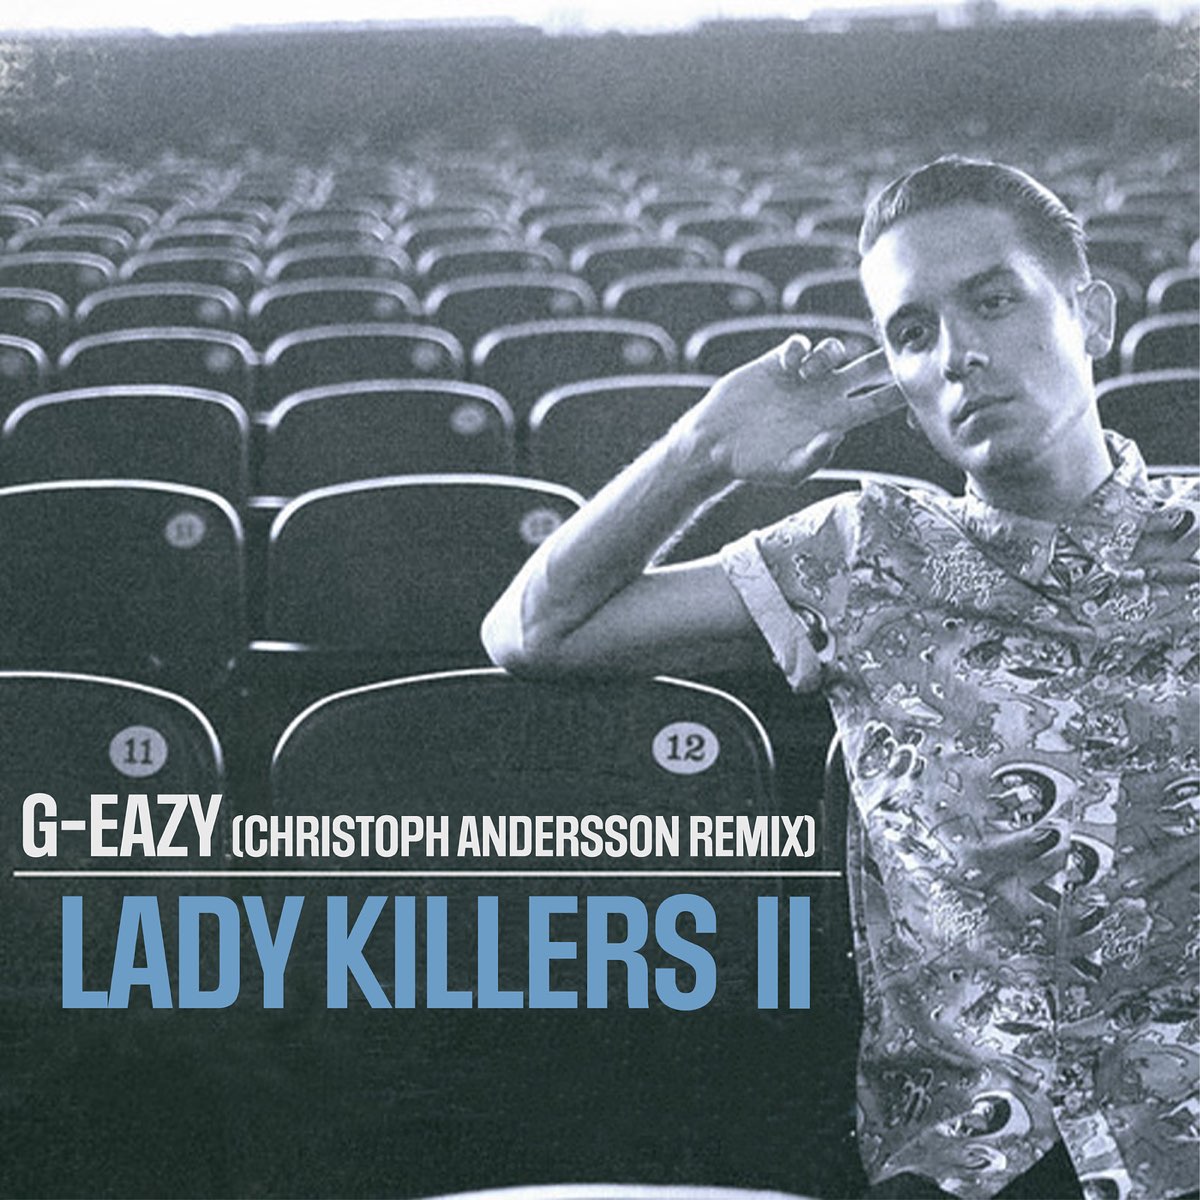 G-Eazy — Lady Killers II (Christoph Andersson Remix) cover artwork